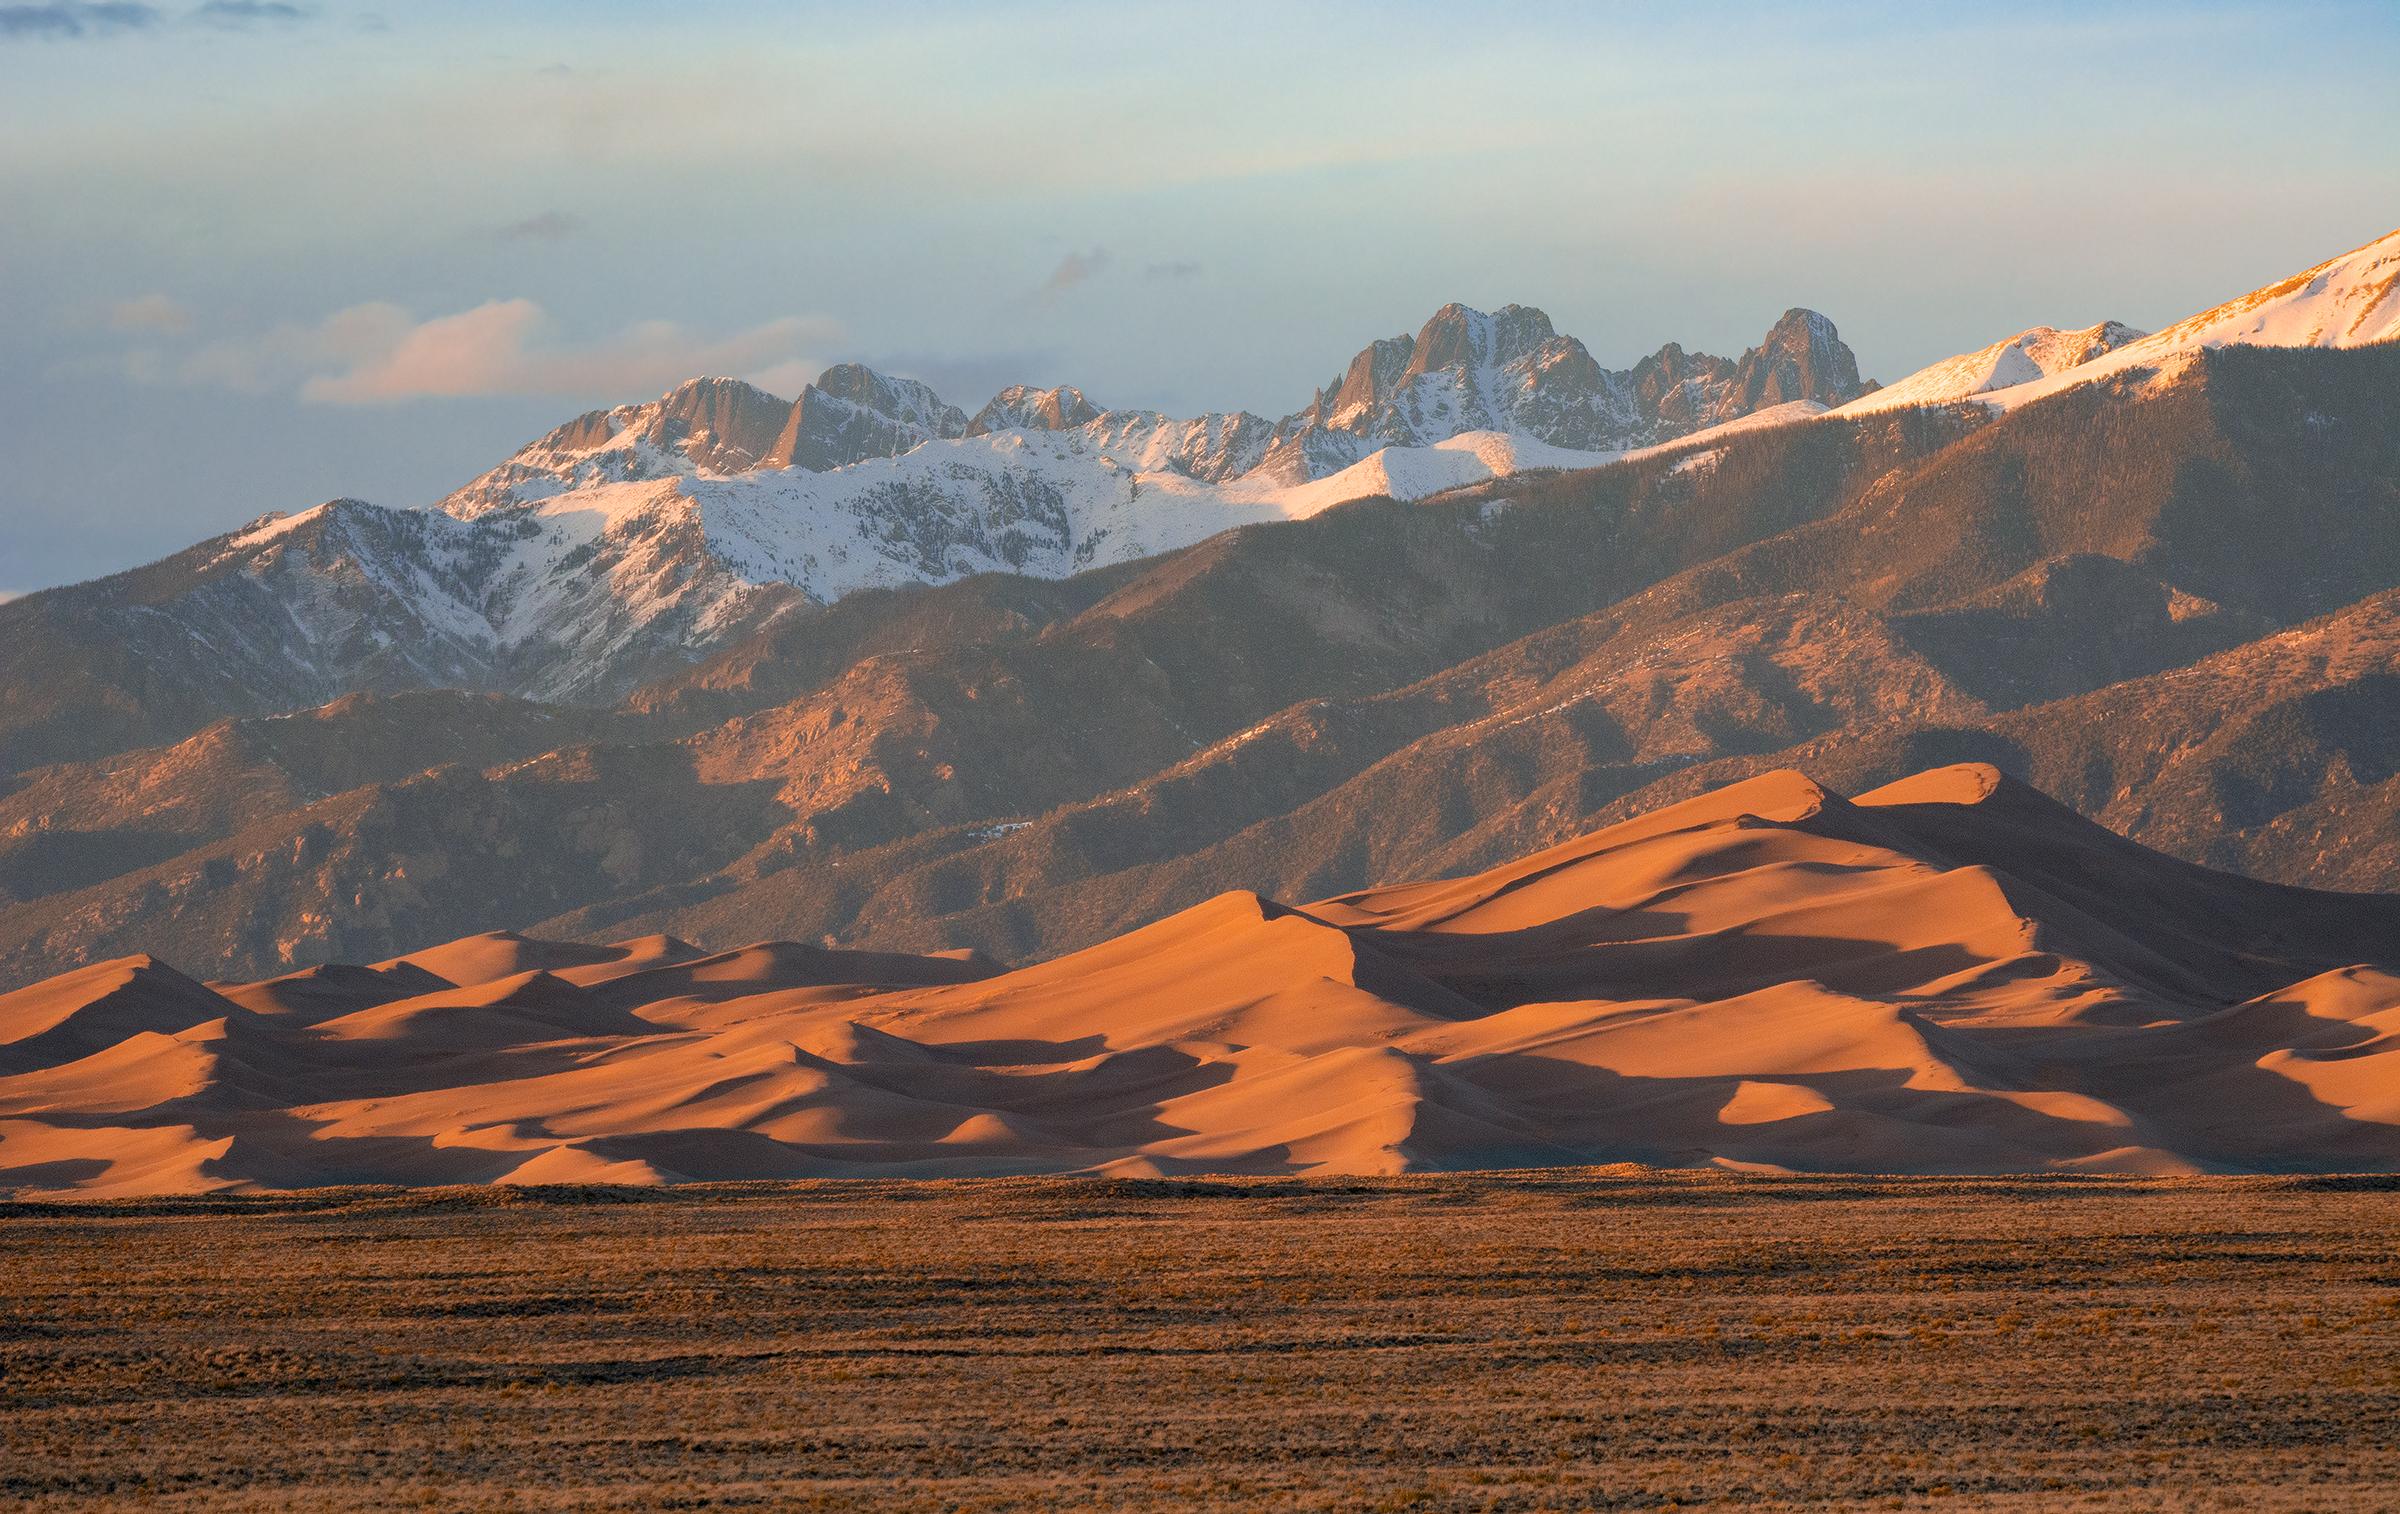 Grasslands, large dunes, and snow-capped peaks at sunset